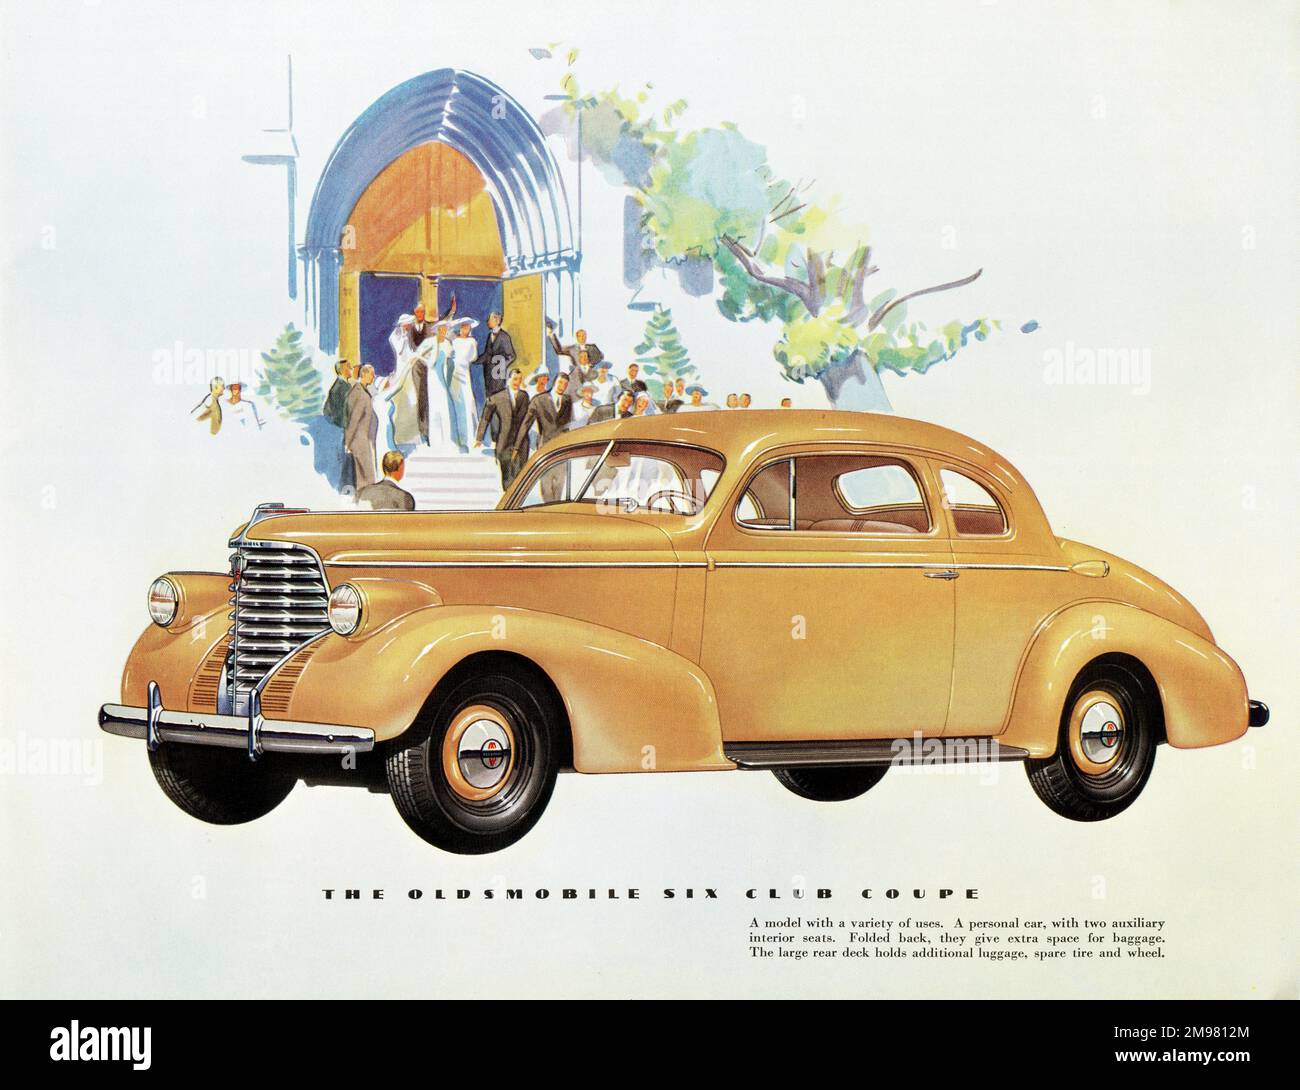 Brochure illustration, Oldsmobile Six, showing a cream-coloured two-door Club Coupe car, with a church wedding taking place in the background. Stock Photo